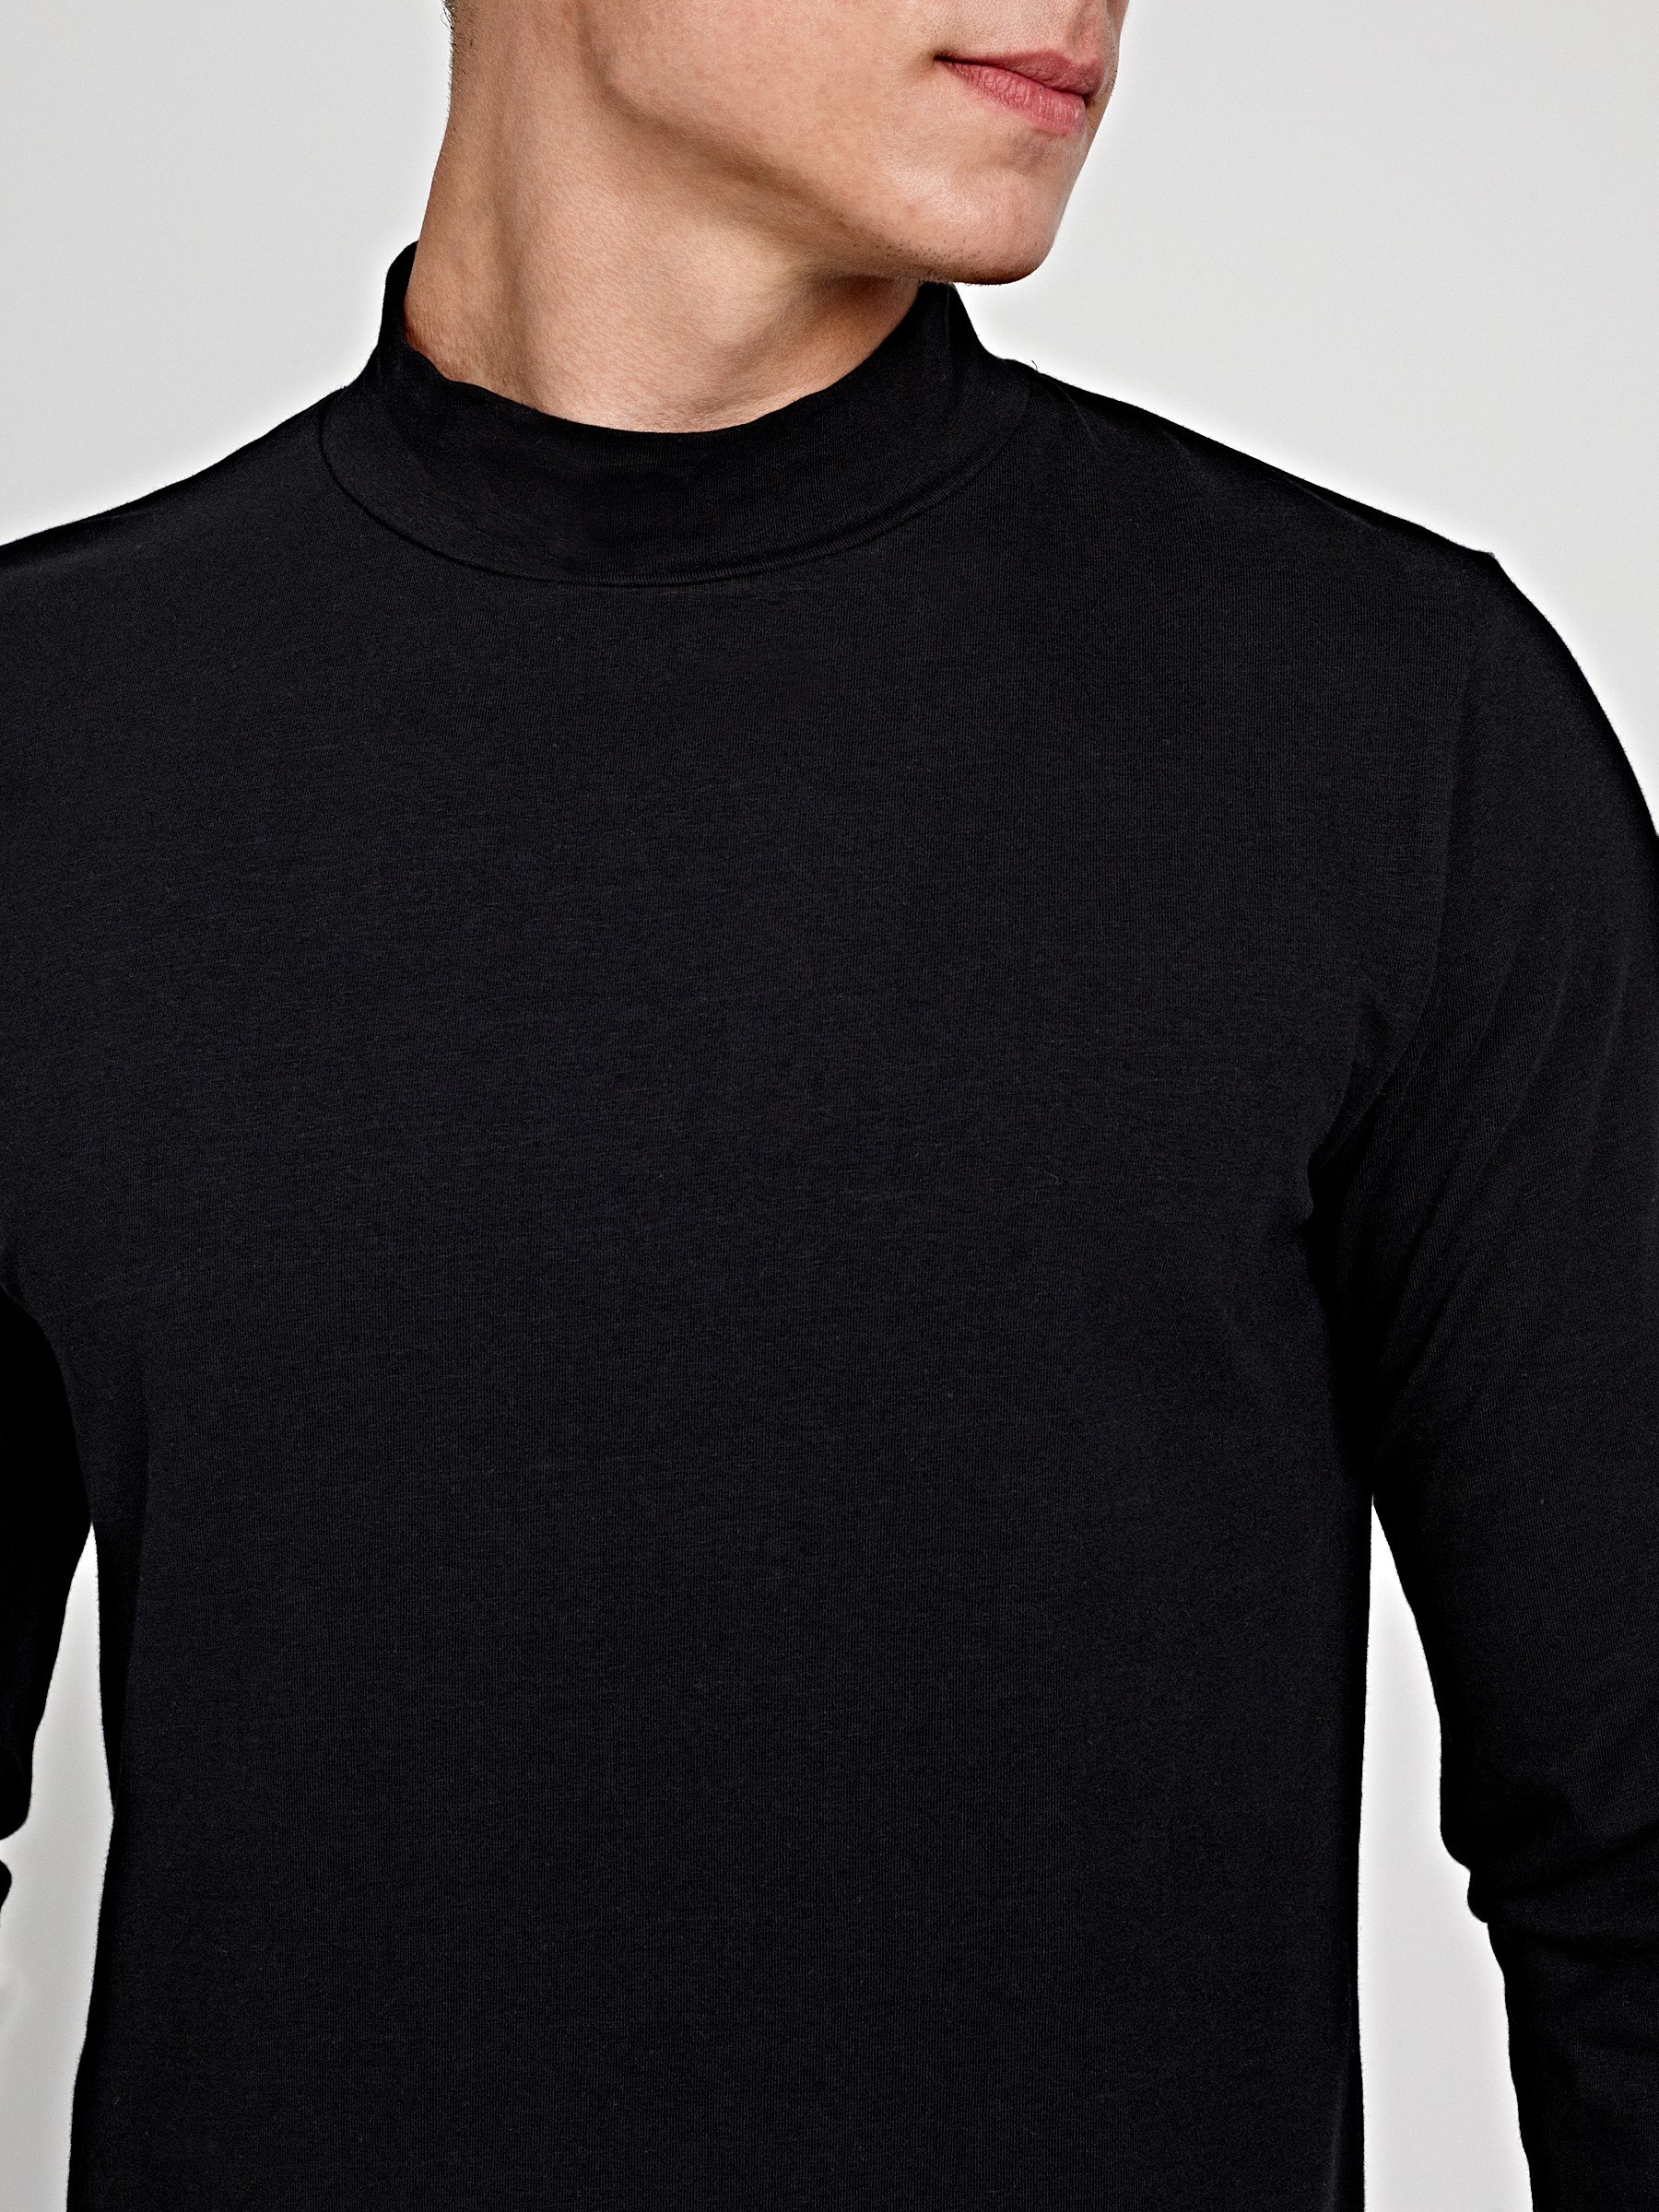 Men's Long Sleeve Athletic T-Shirts Workout Muscle Tee Compression Base  Layer